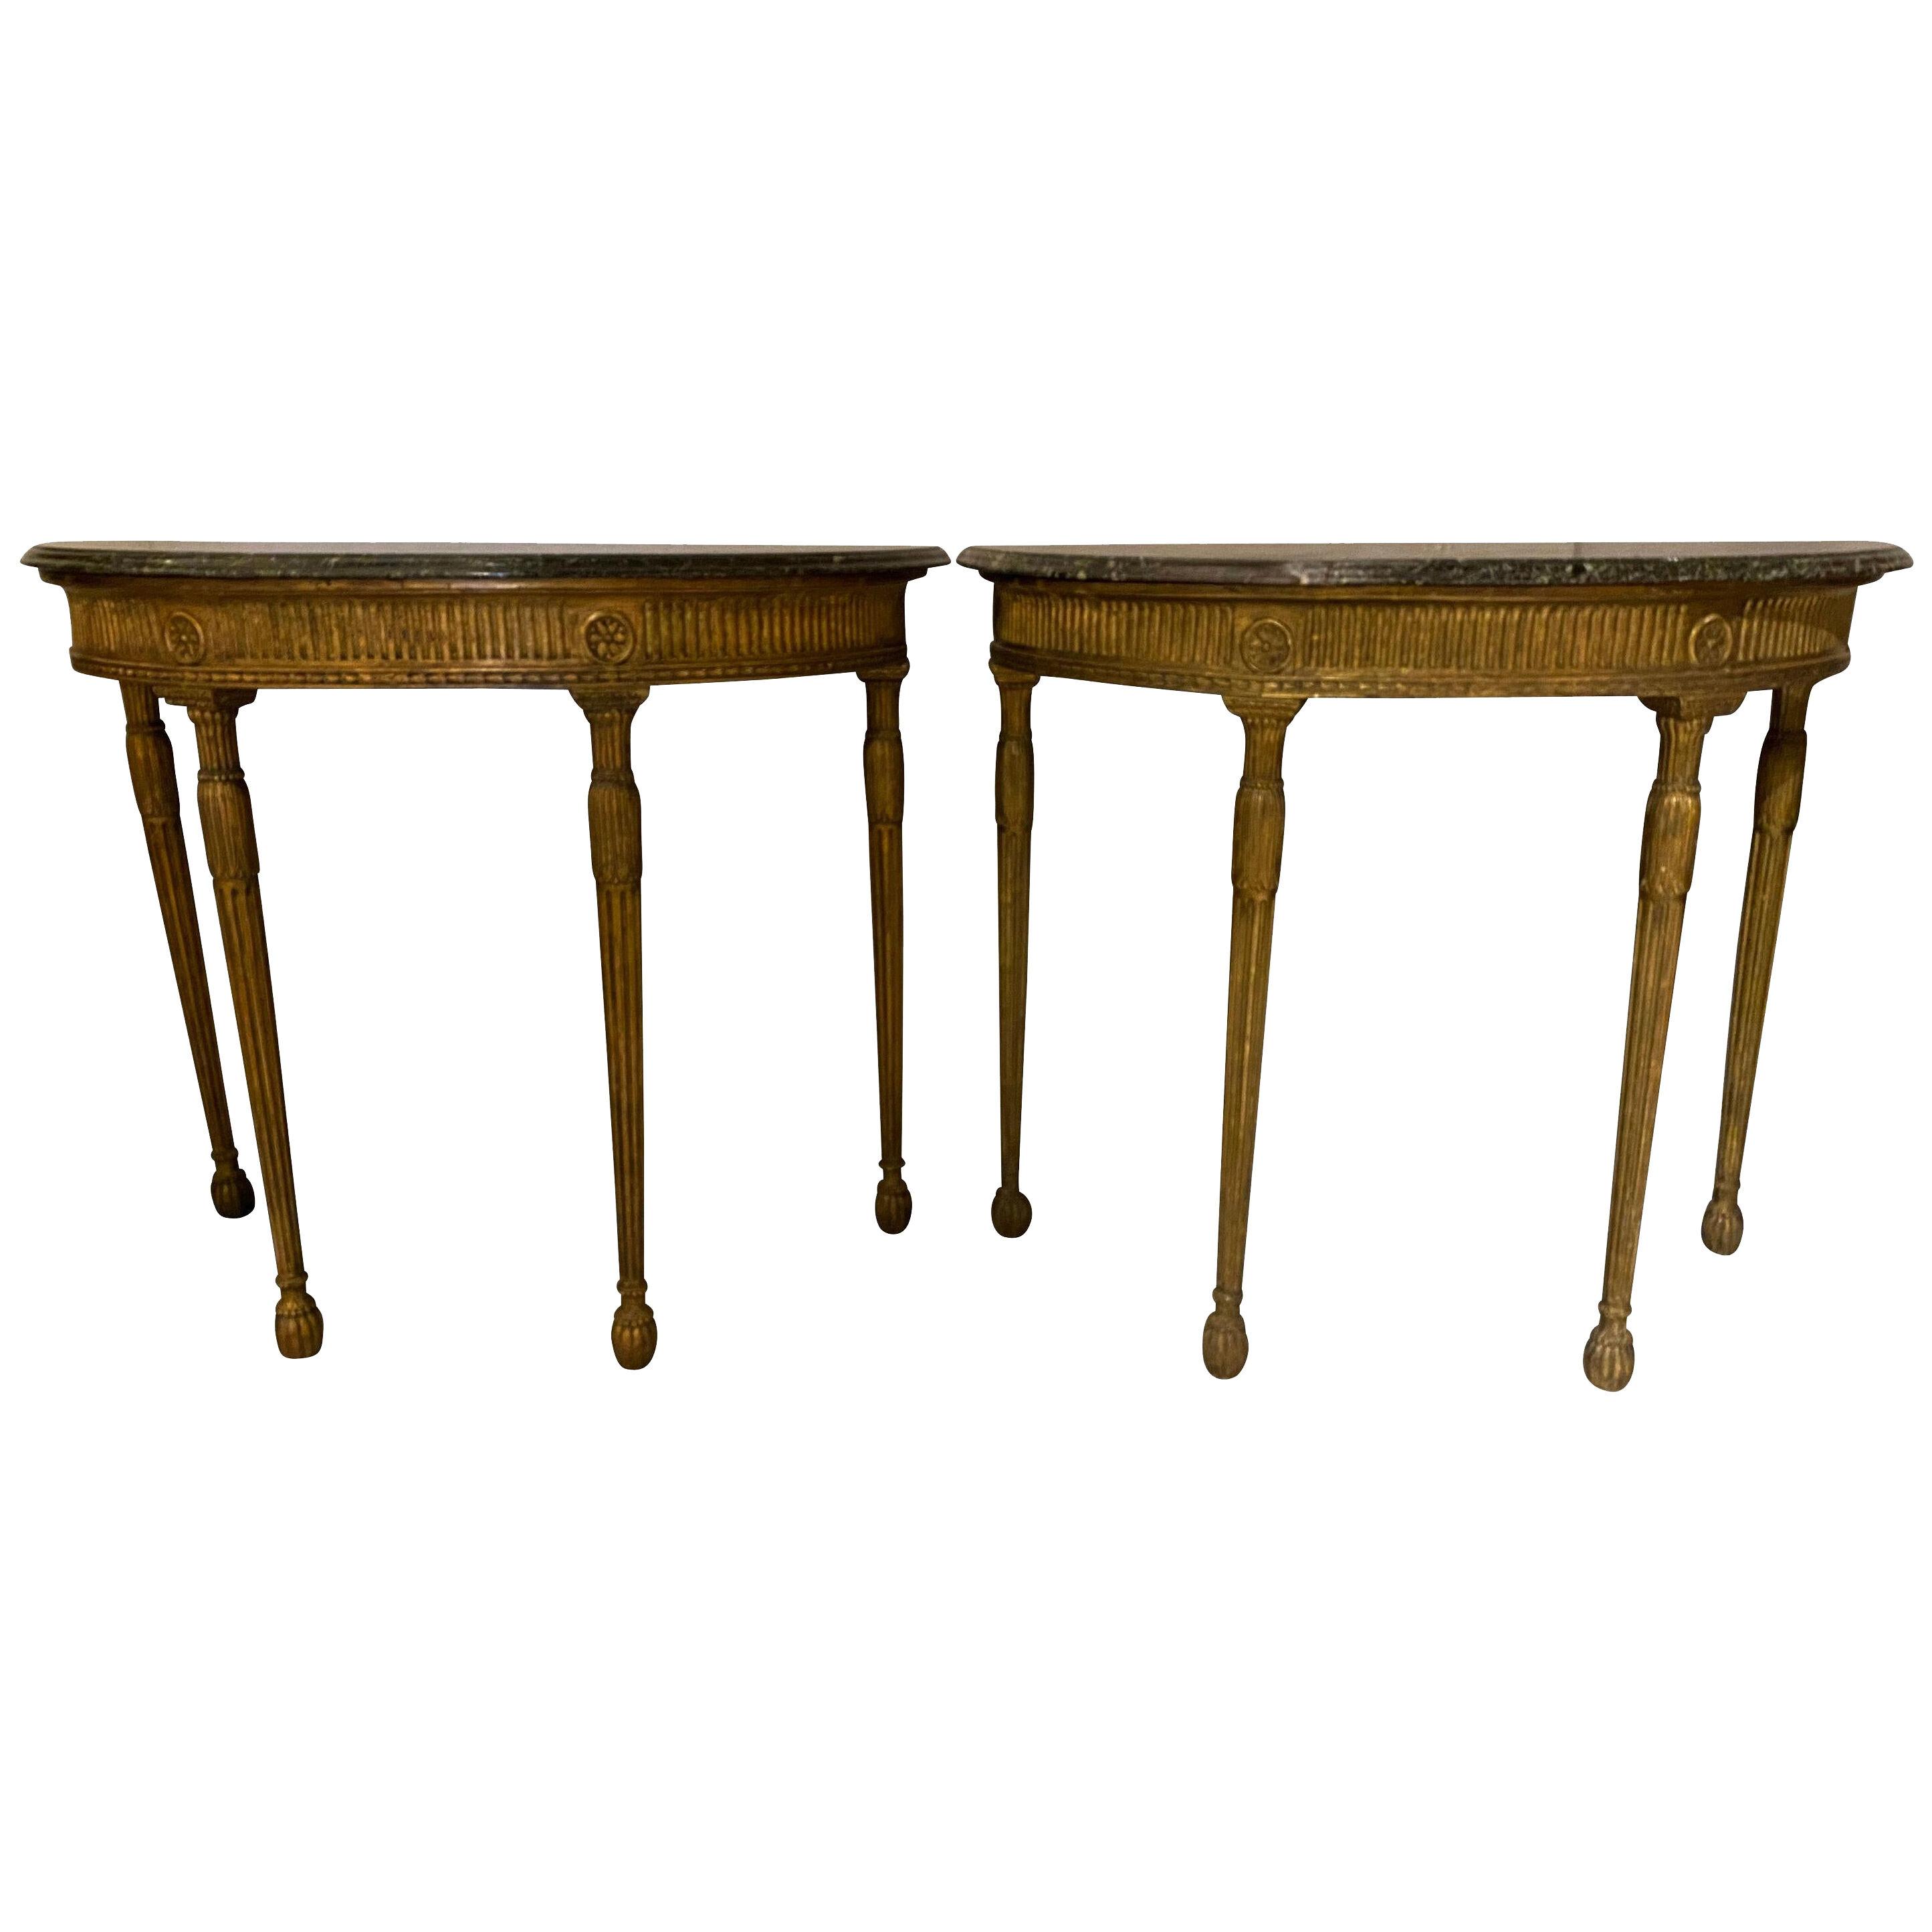 Pair of George III Giltwood Demilune Console Tables